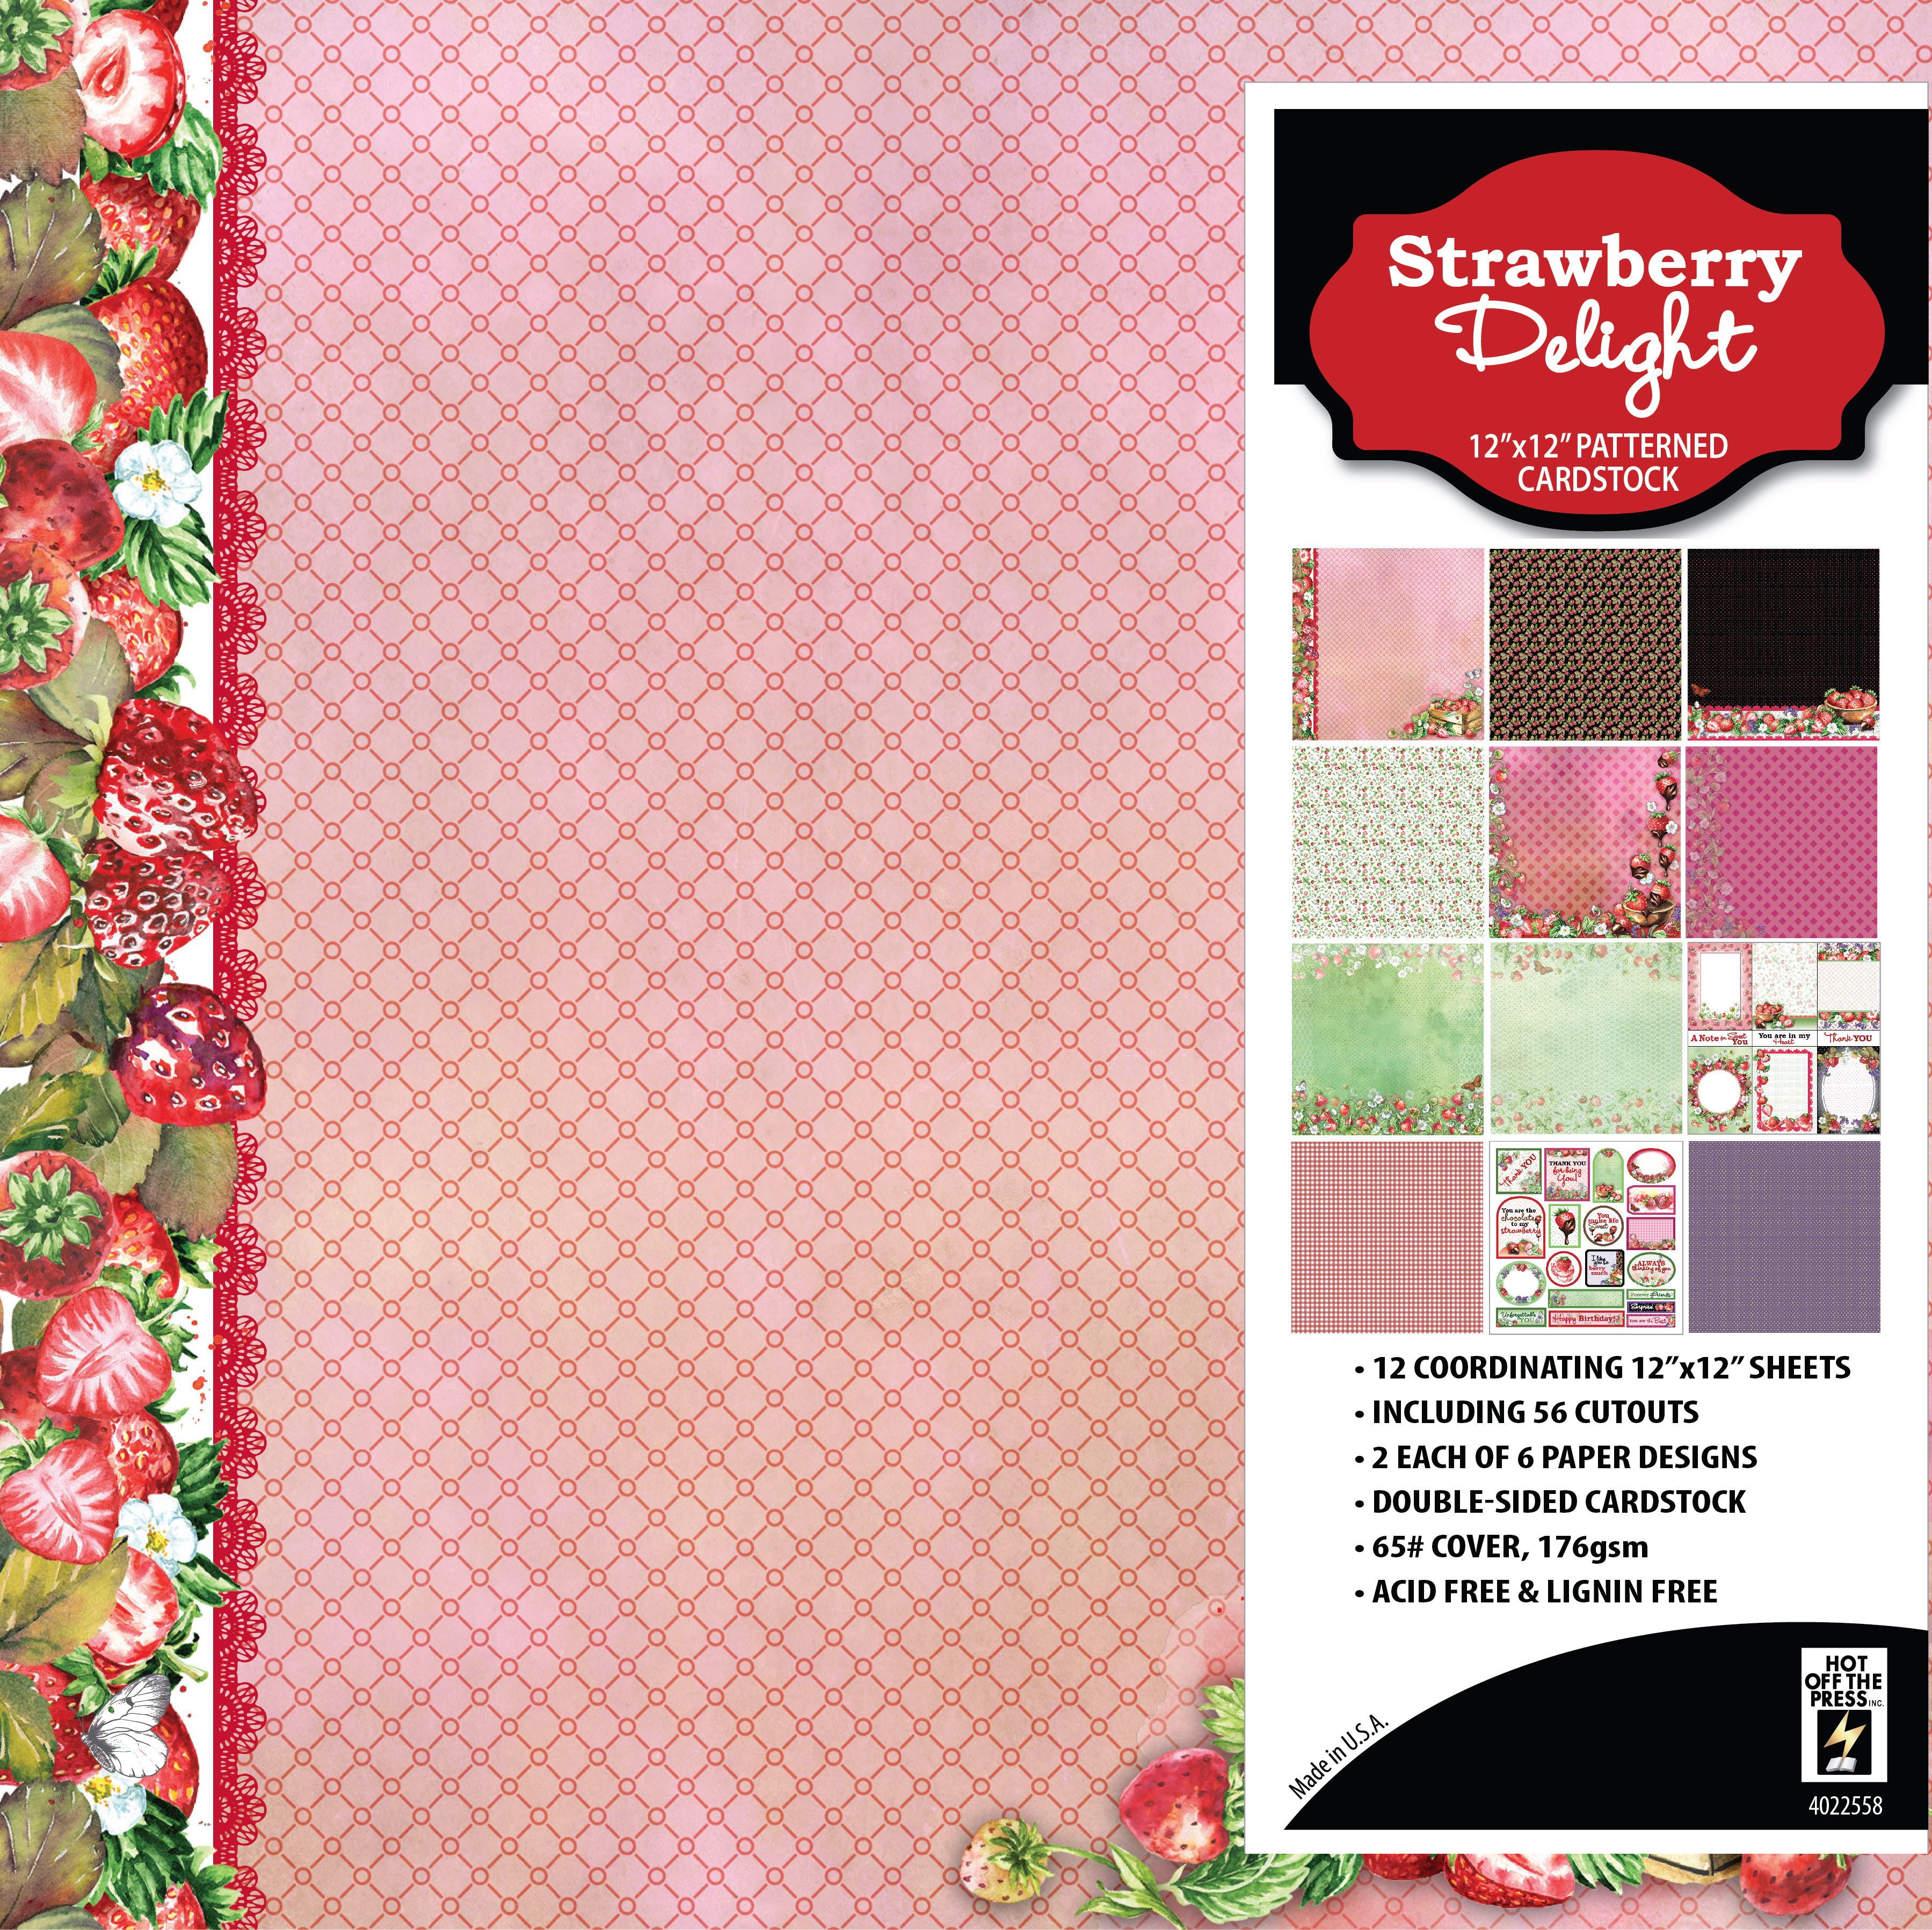 Strawberry Delight 12x12 Patterned Cardstock